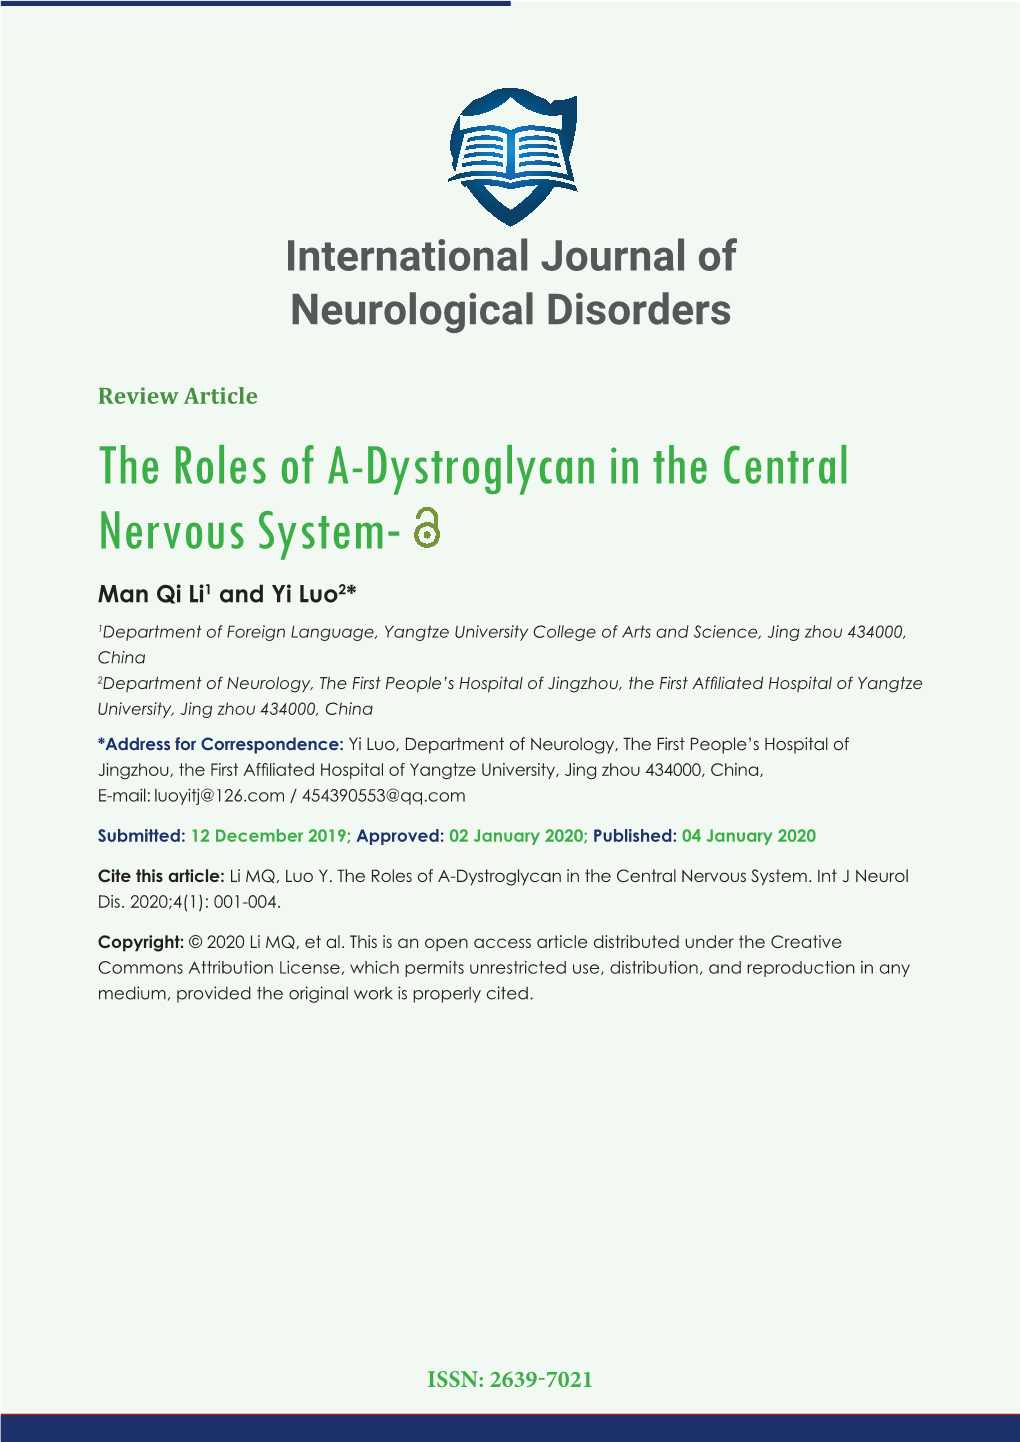 The Roles of A-Dystroglycan in the Central Nervous System- Man Qi Li1 and Yi Luo2*